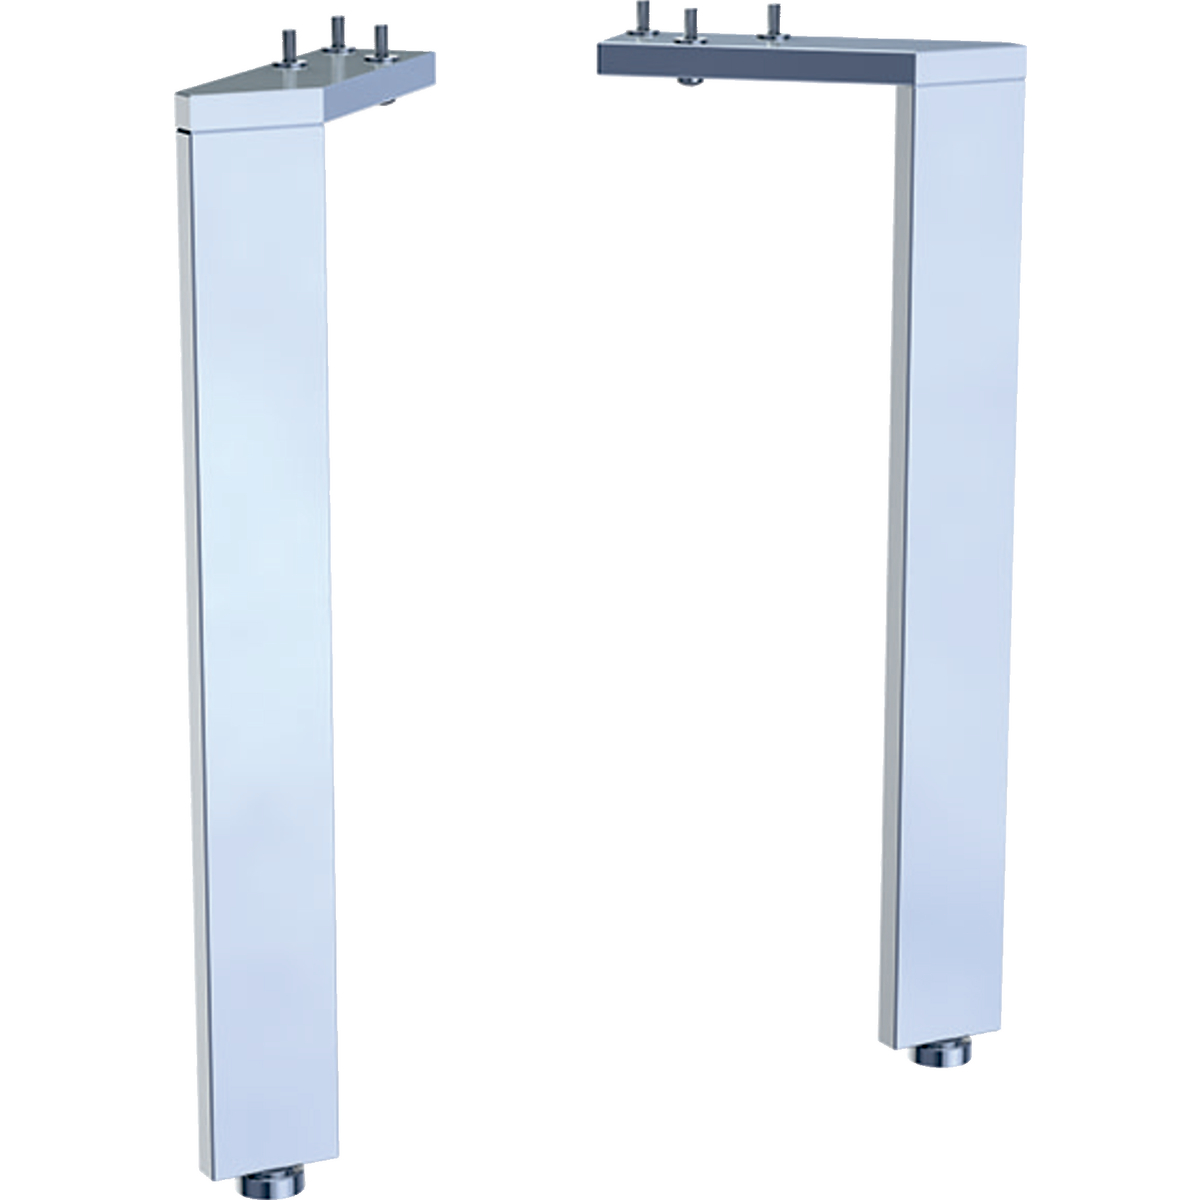 Geberit 500657002 Acanto Feet for Compact Basin Units (Pair) - Chrome